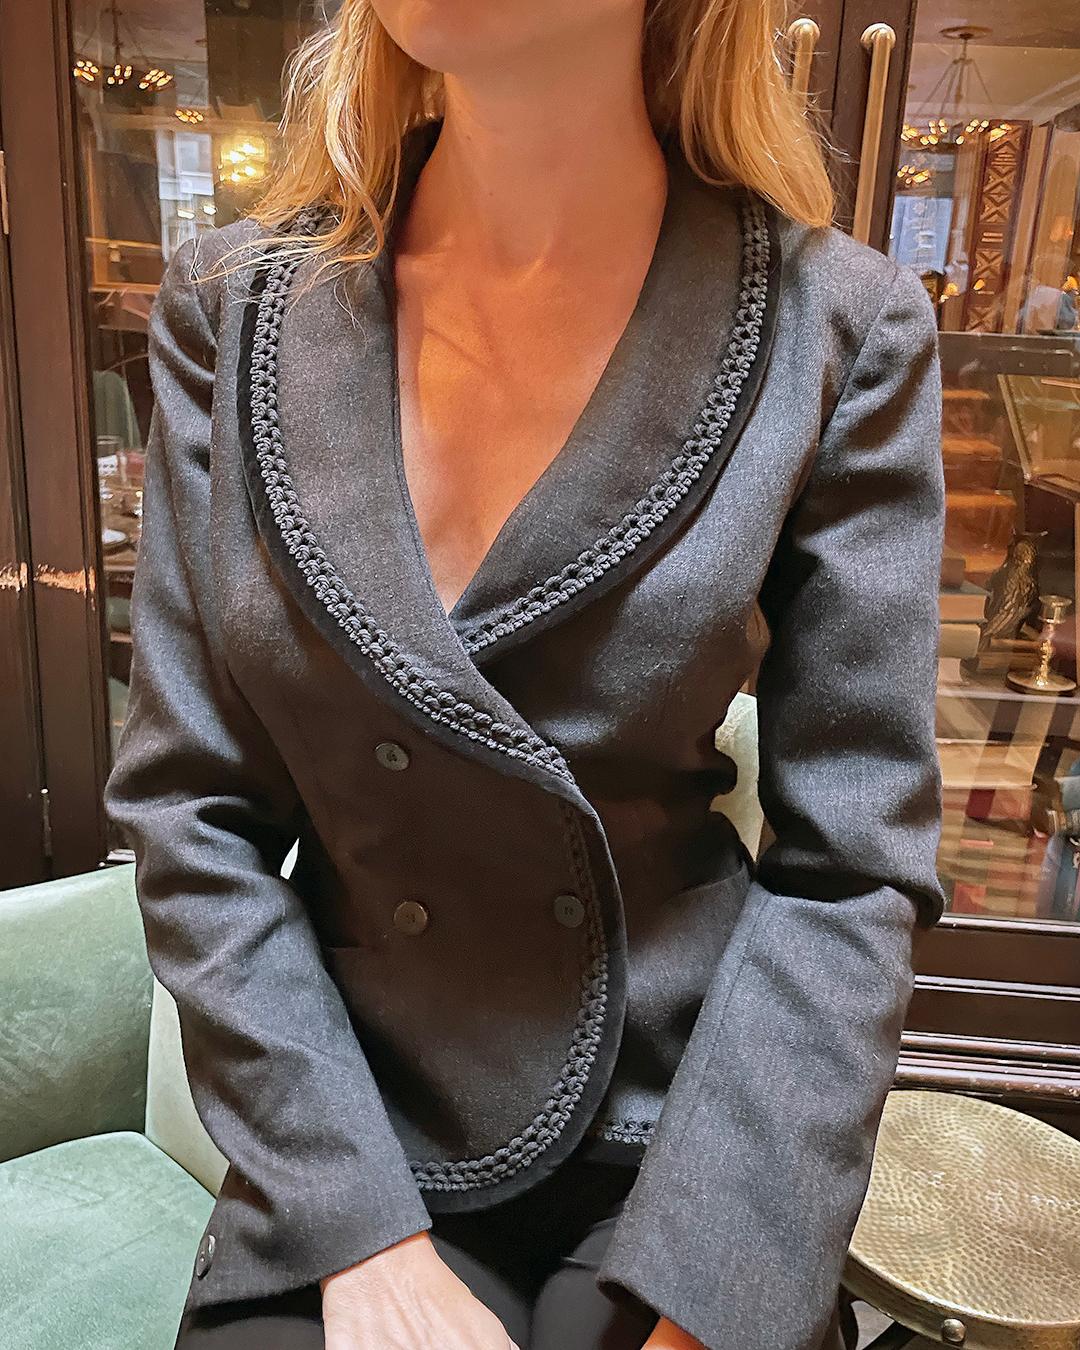 Vintage Blumarine Virgin Wool Blazer with Velvet Trim: This is actually one of my favorite blazers I've ever tried on— the fit is just perfection! It feels so feminine and sophisticated. It was made in Italy by Blumarine in the early 2000s. The